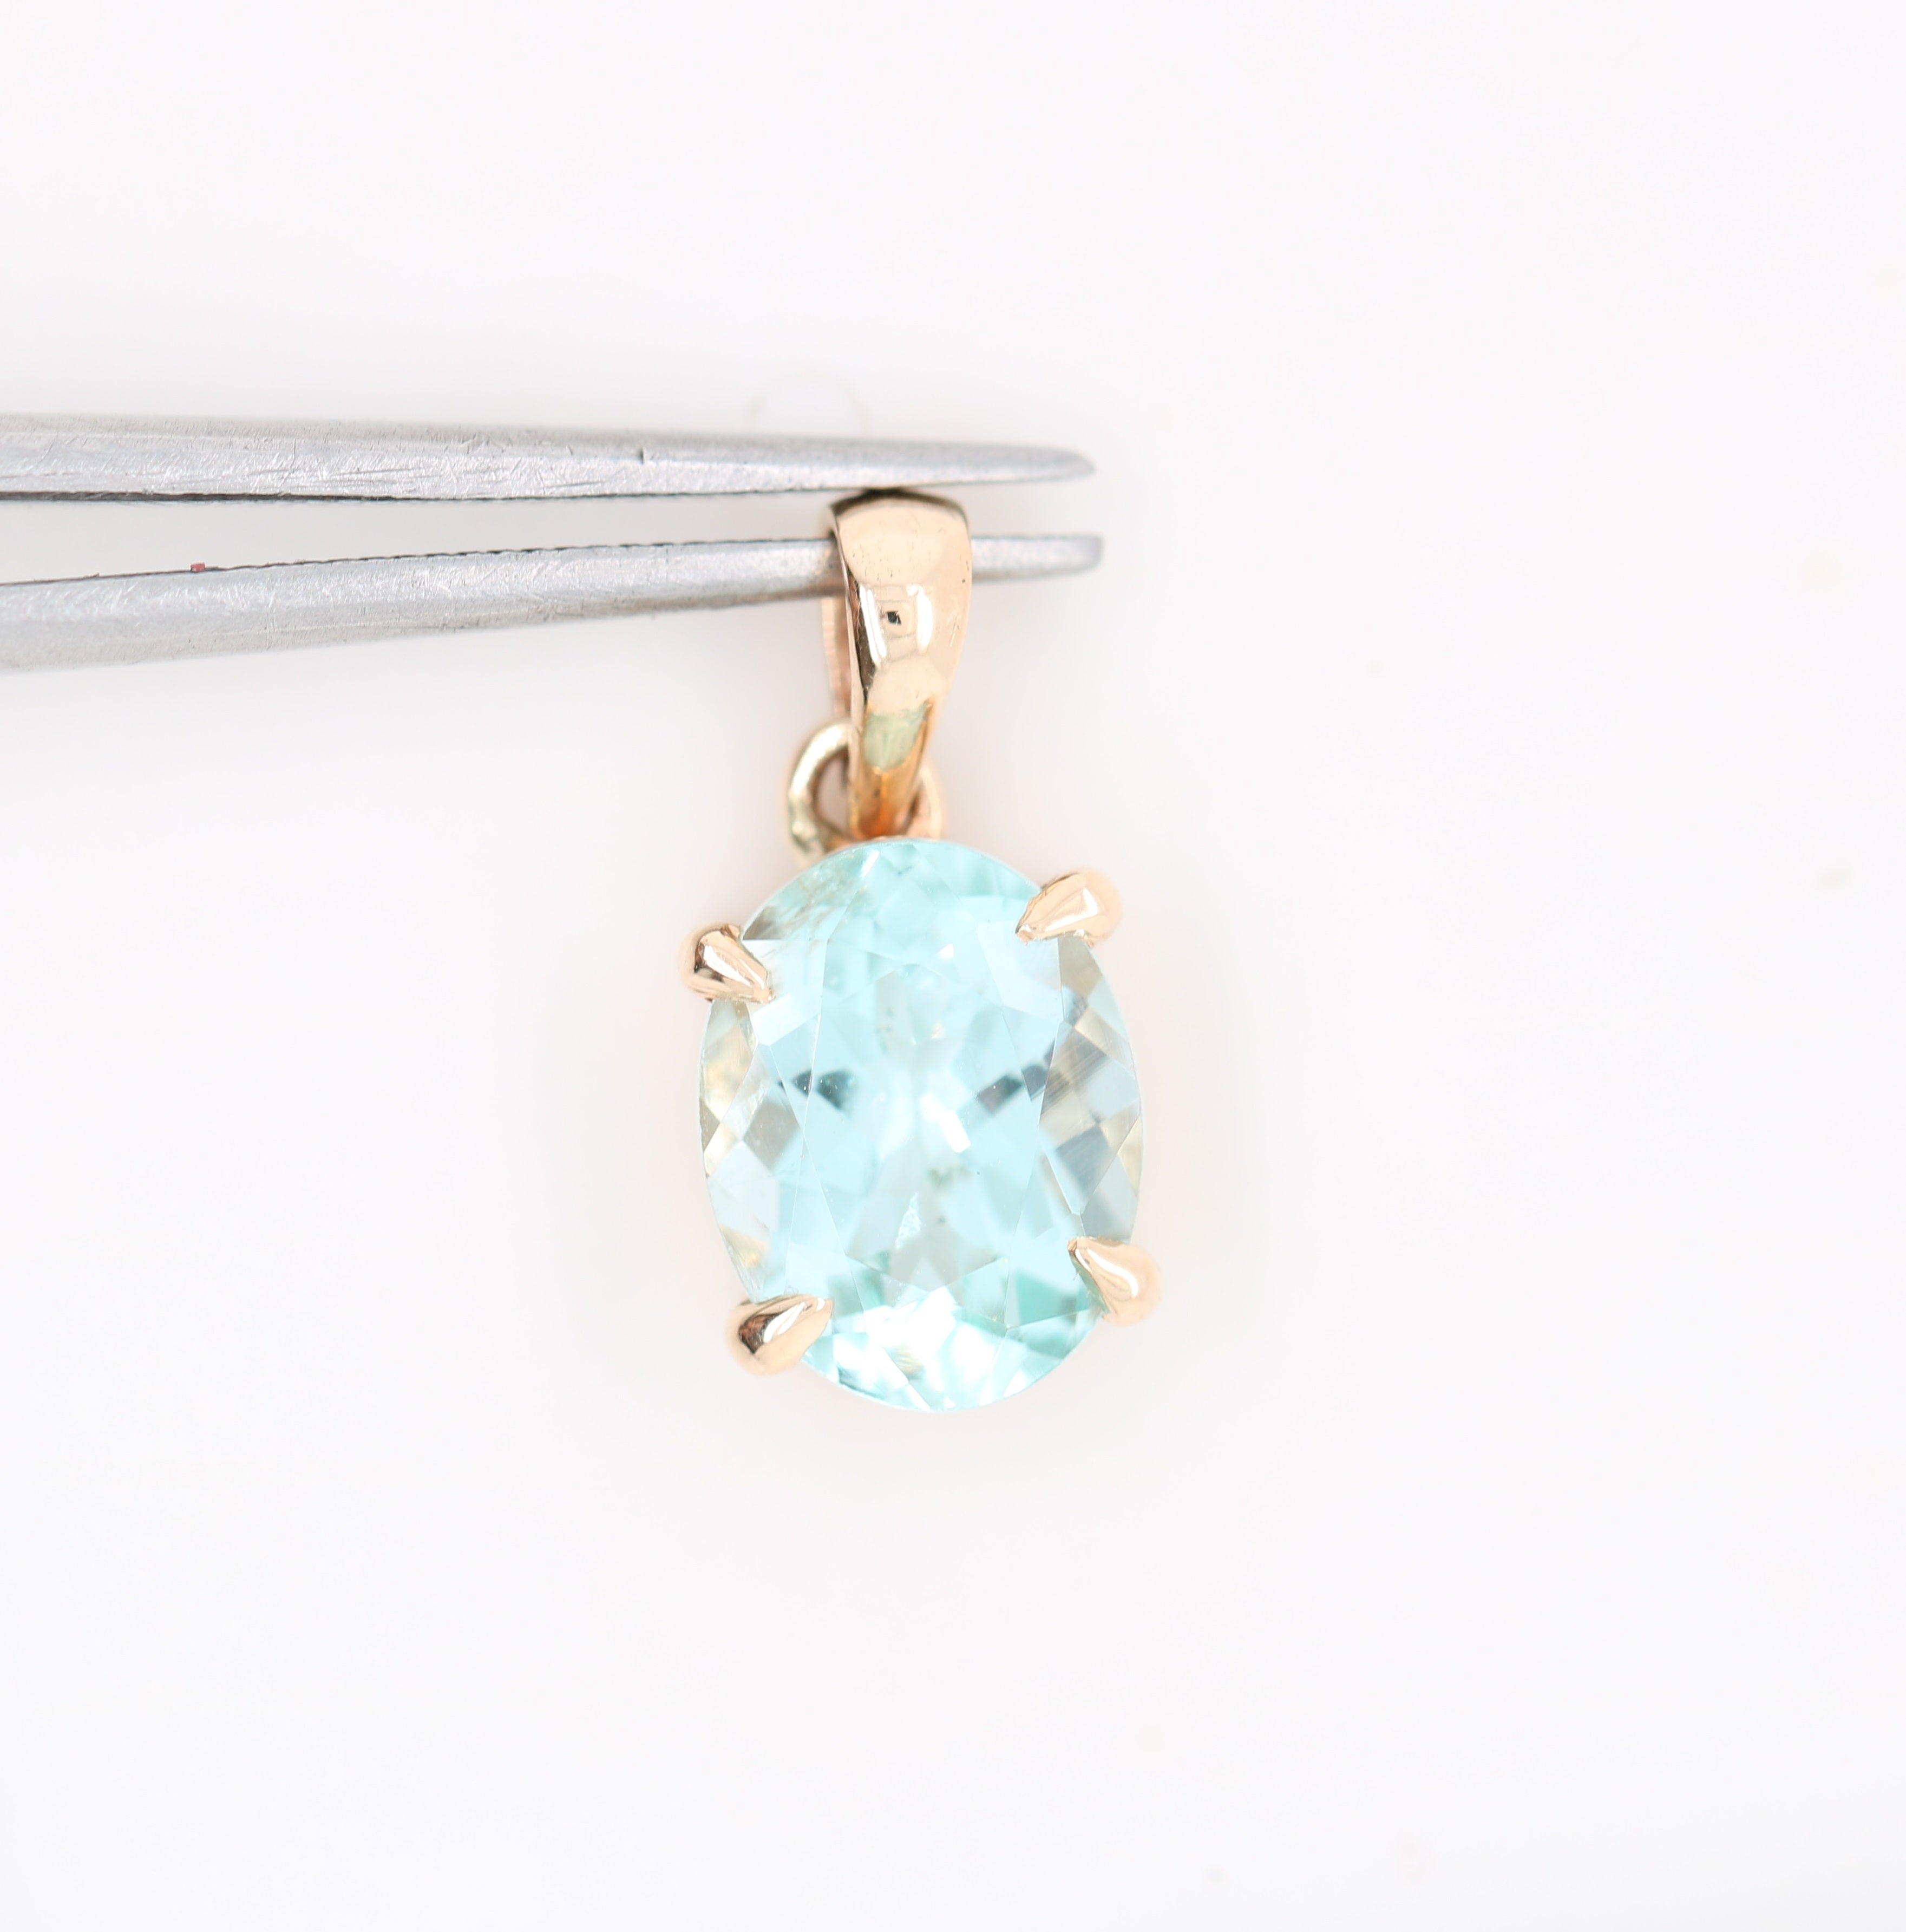 Green Aquamarine Oval Stone Pendant With 10K Yellow Gold Pendant Gift For Her